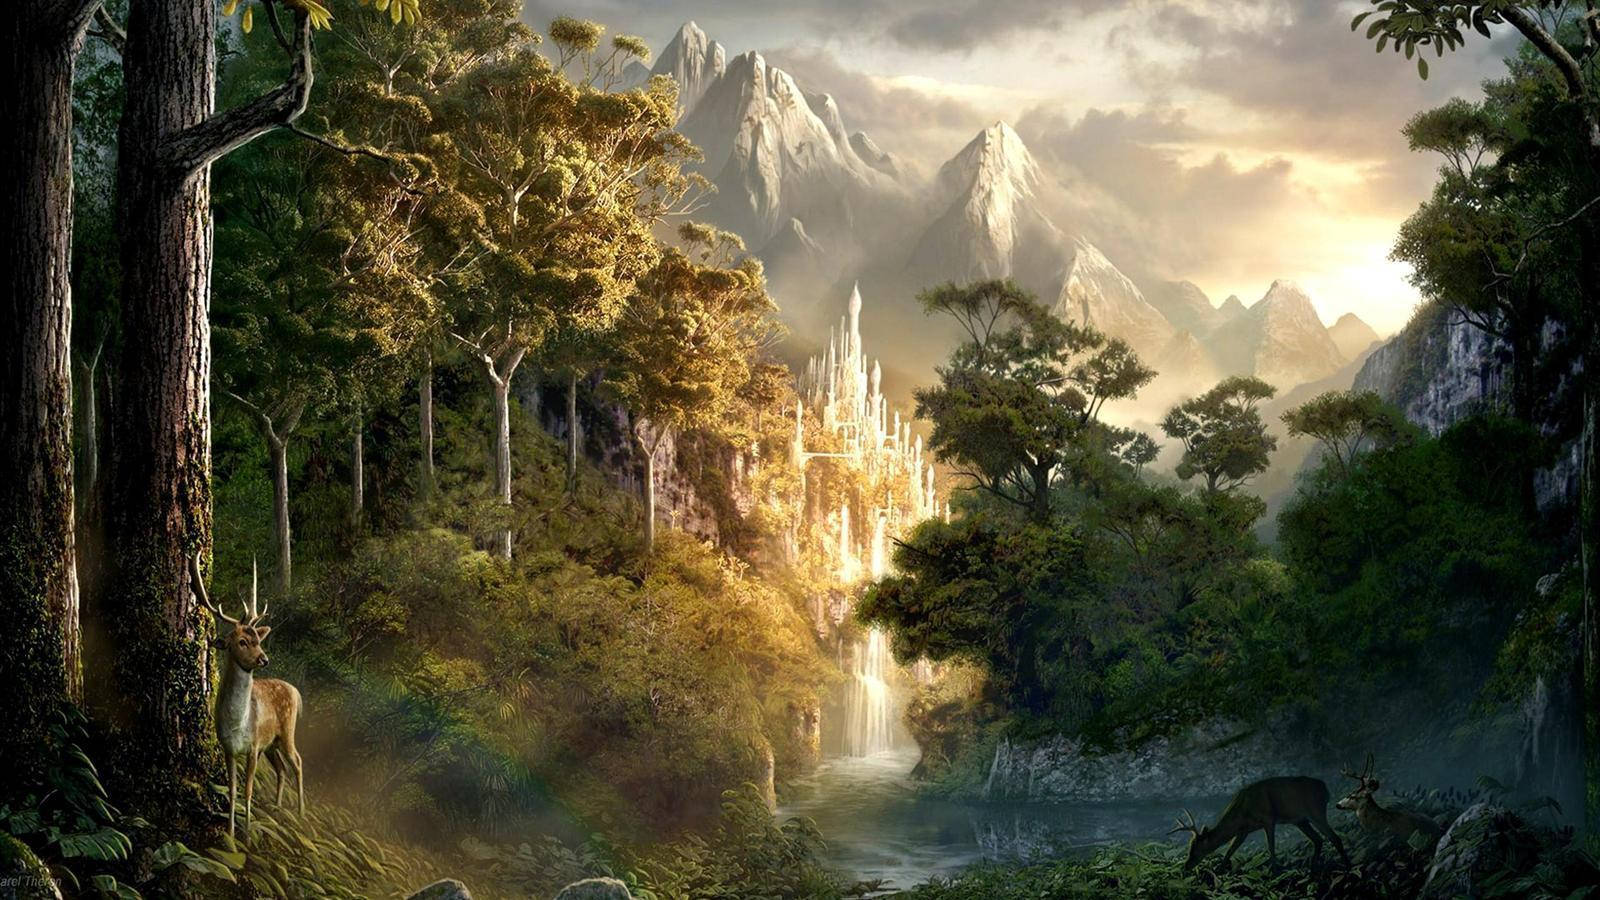 A Fantasy Scene With A Waterfall And Trees Wallpaper